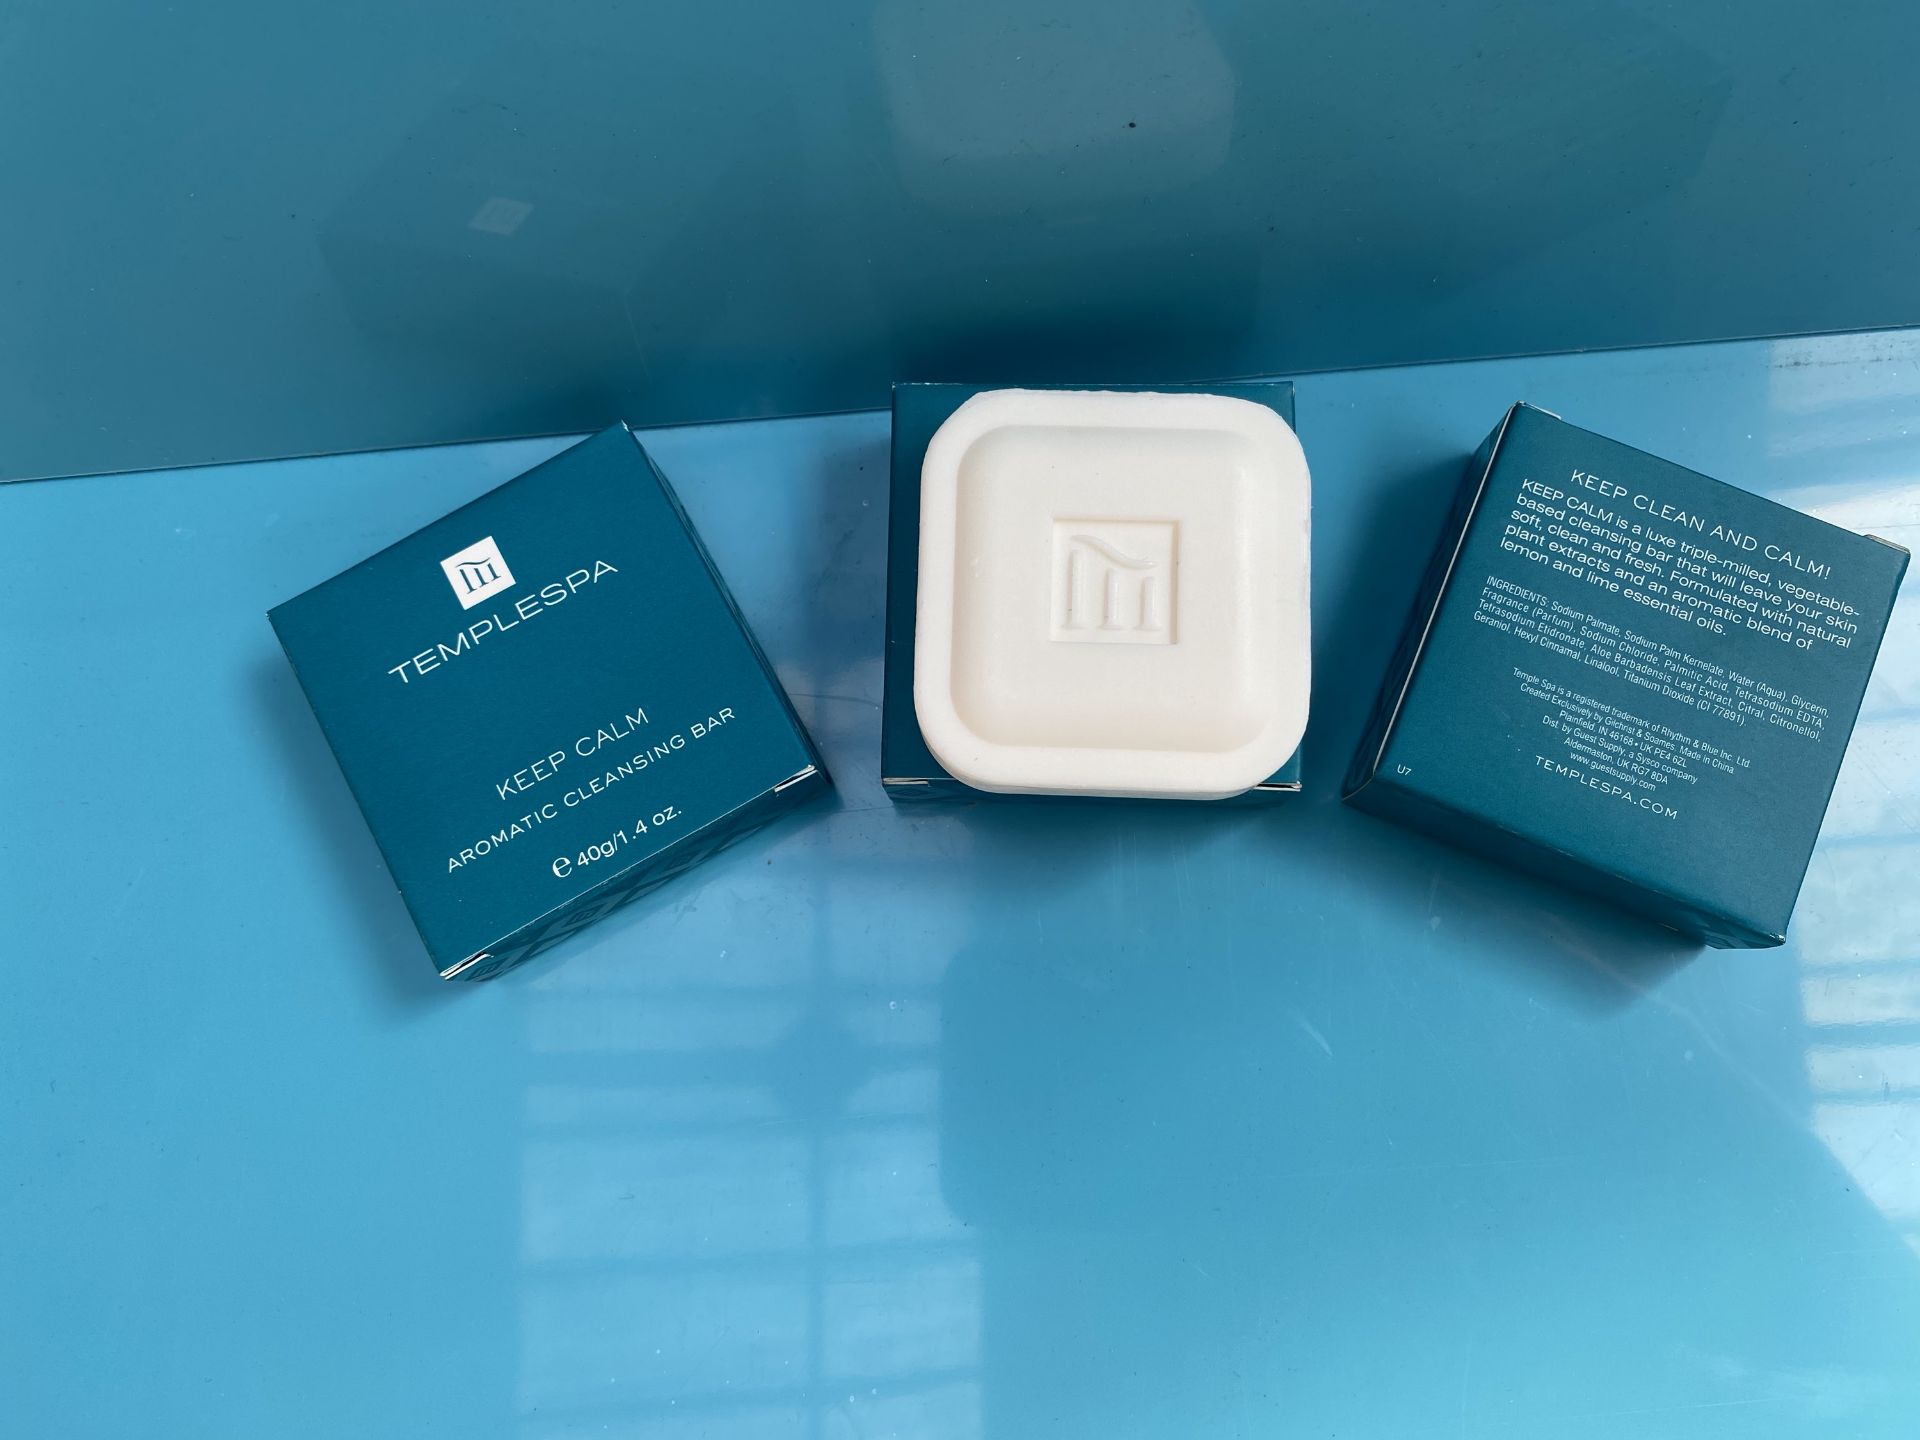 200 x TEMPLESPA 40g aromatic cleansing bar